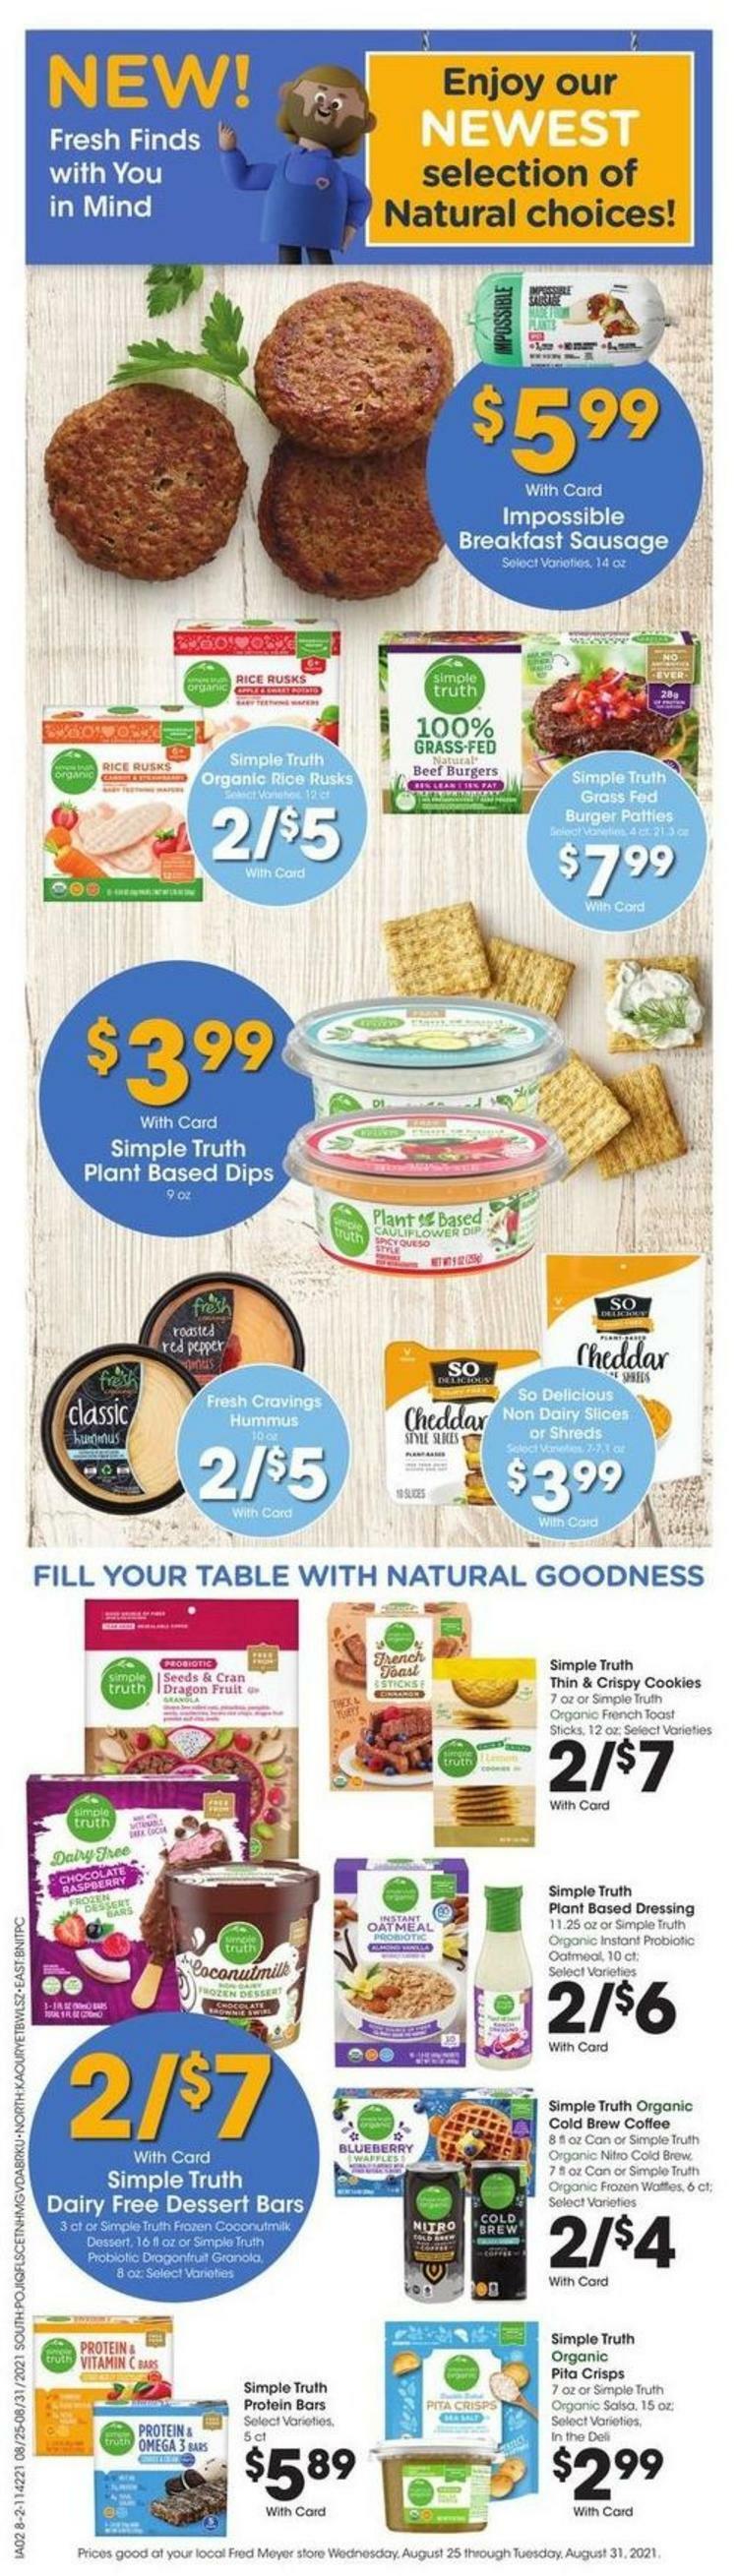 Fred Meyer Weekly Ad from August 25